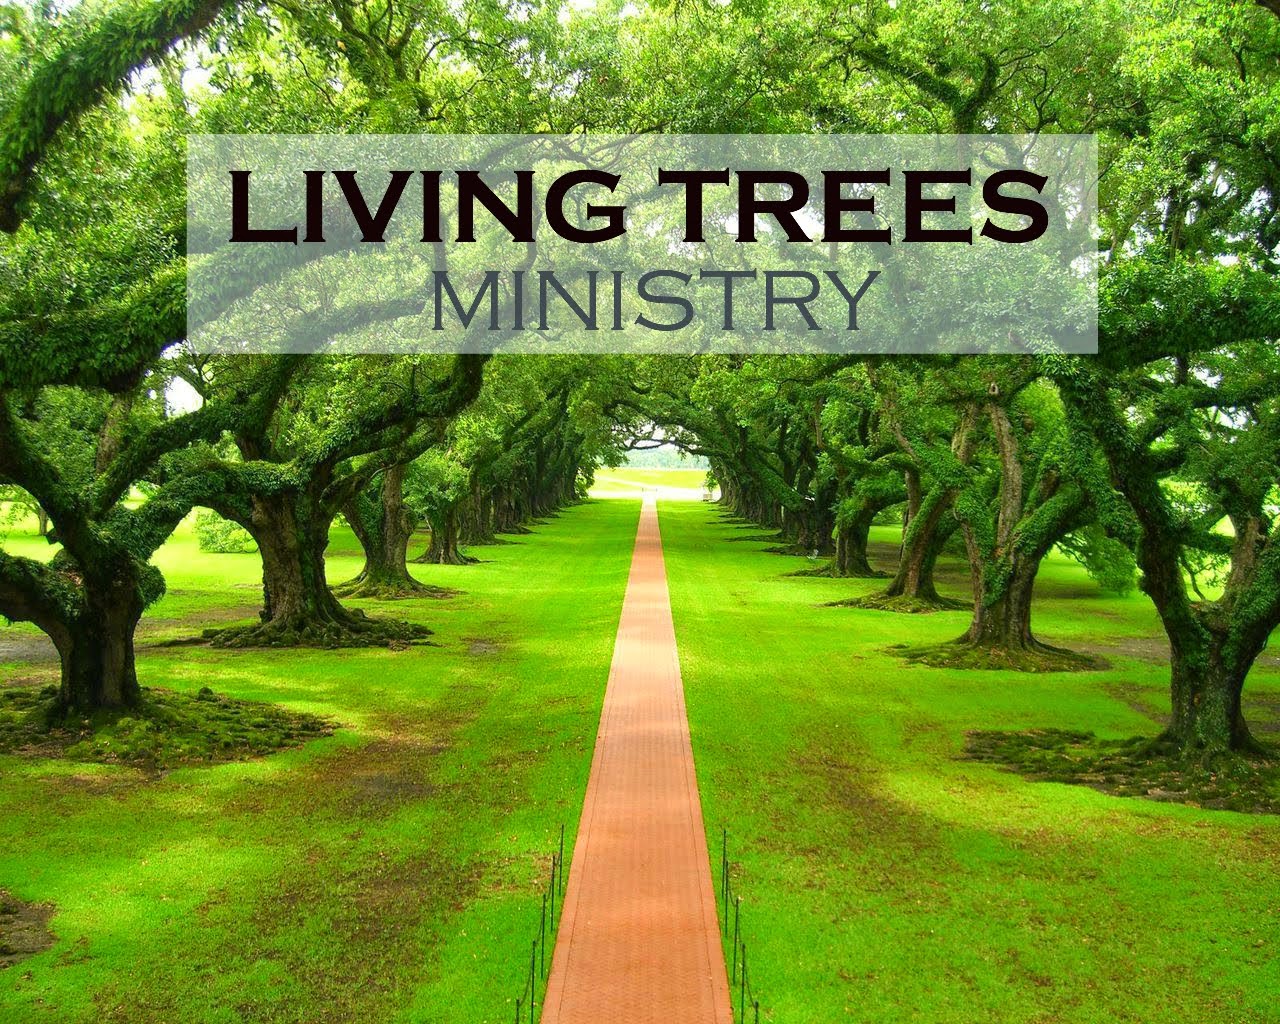 LIVING TREES MINISTRY